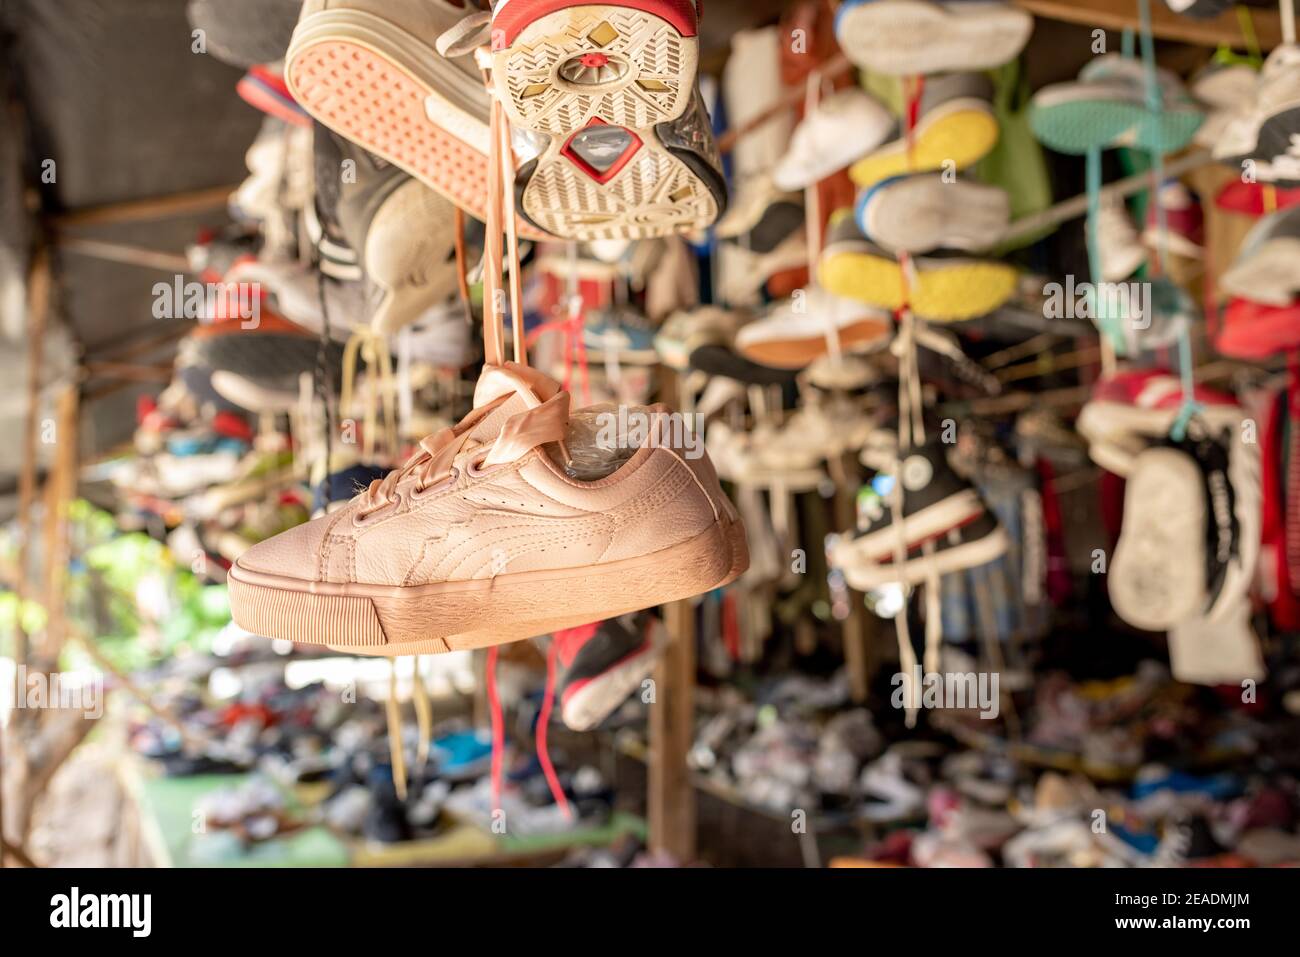 Ukay Ukay Second Hand Products Shop General Luna, Siargao Island, The Philippines, South East Asia Stock Photo